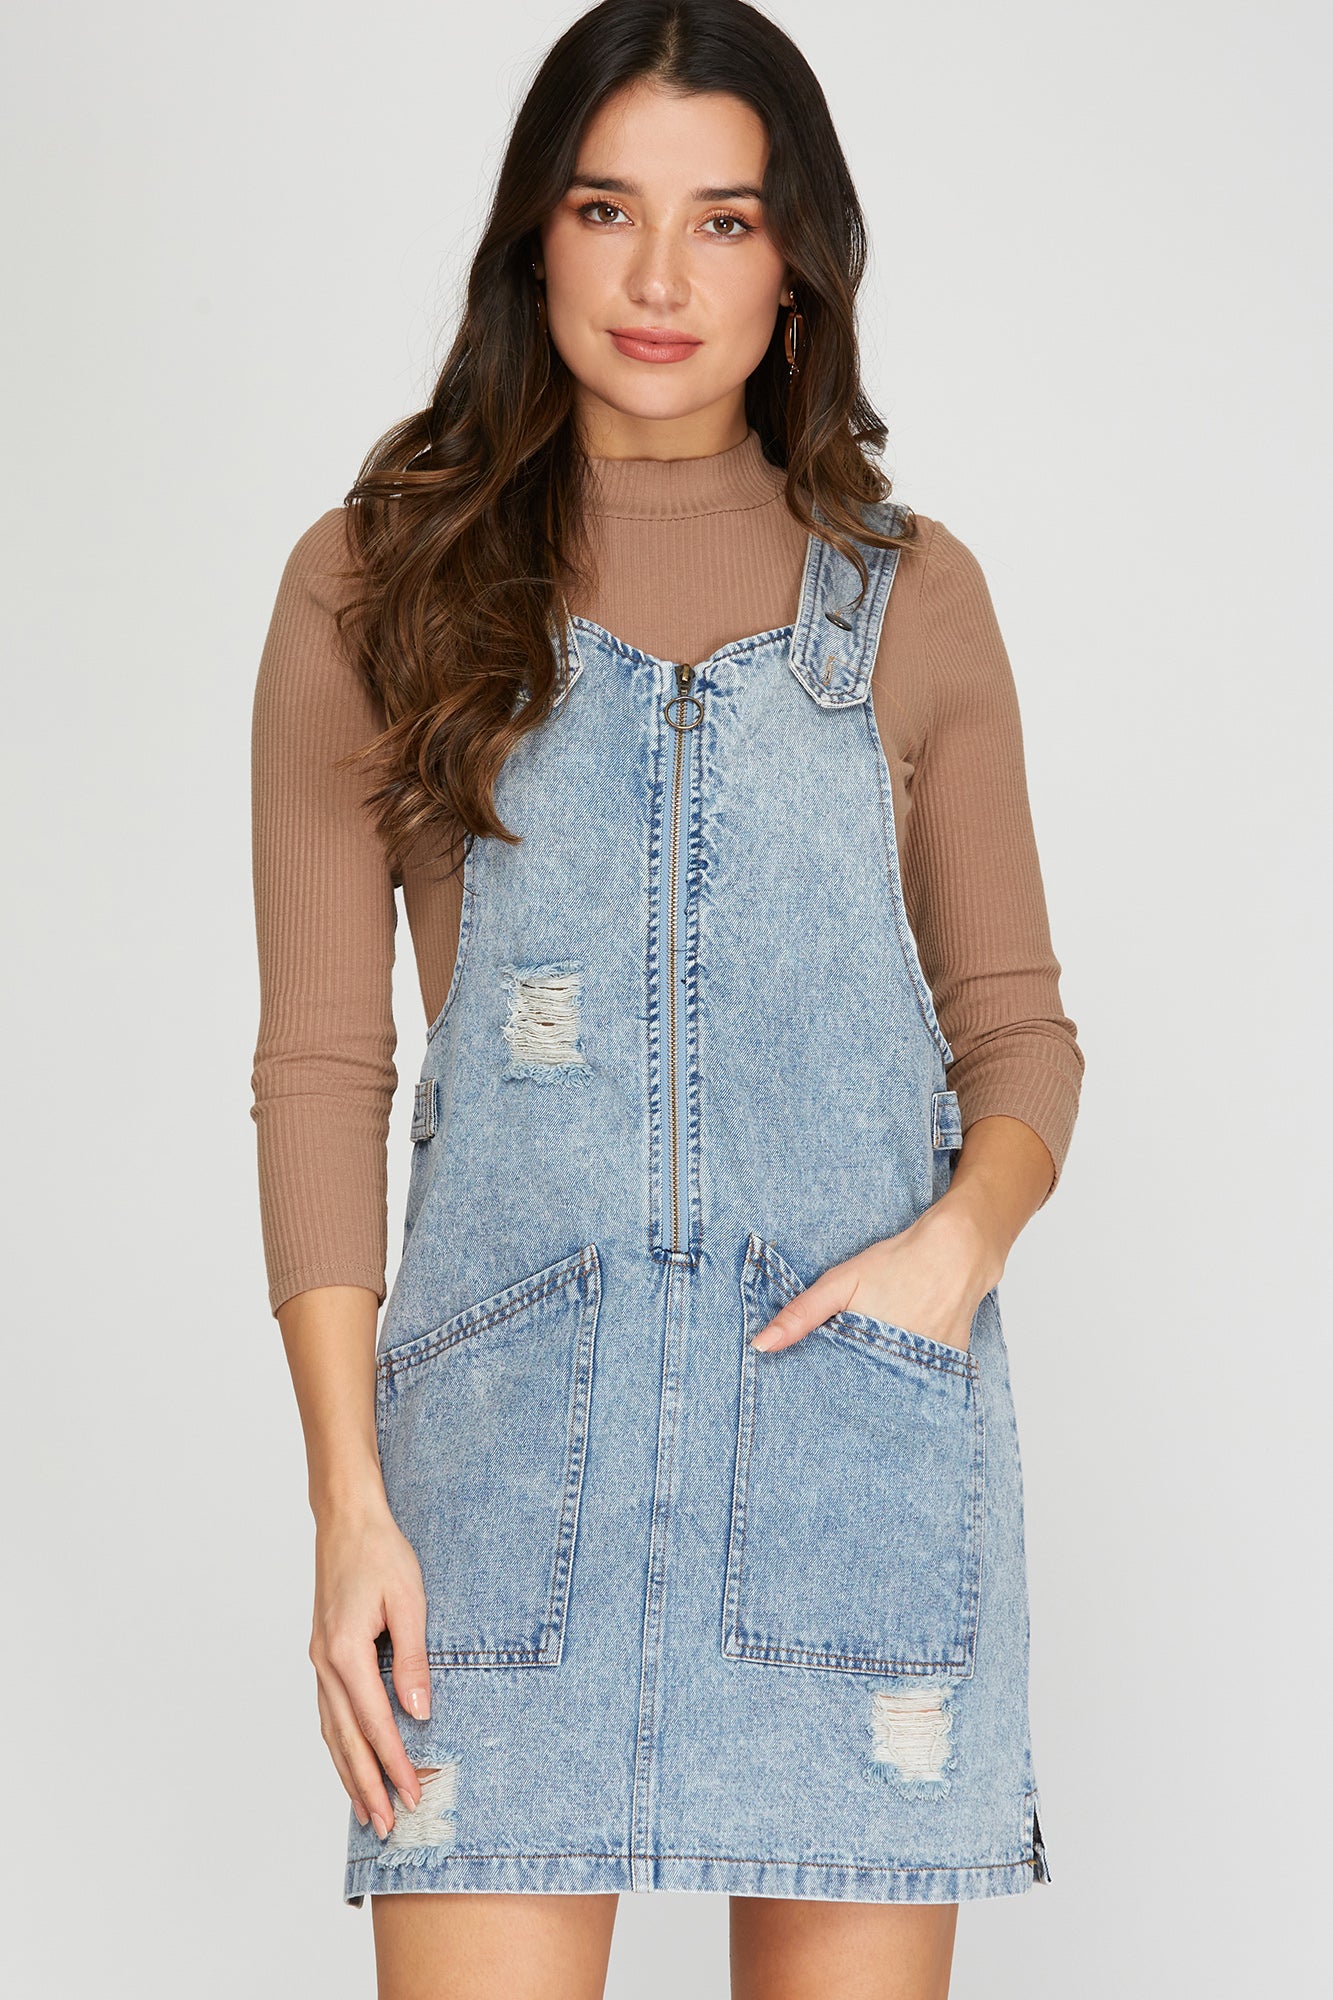 Zip Up Front Overall Dress!